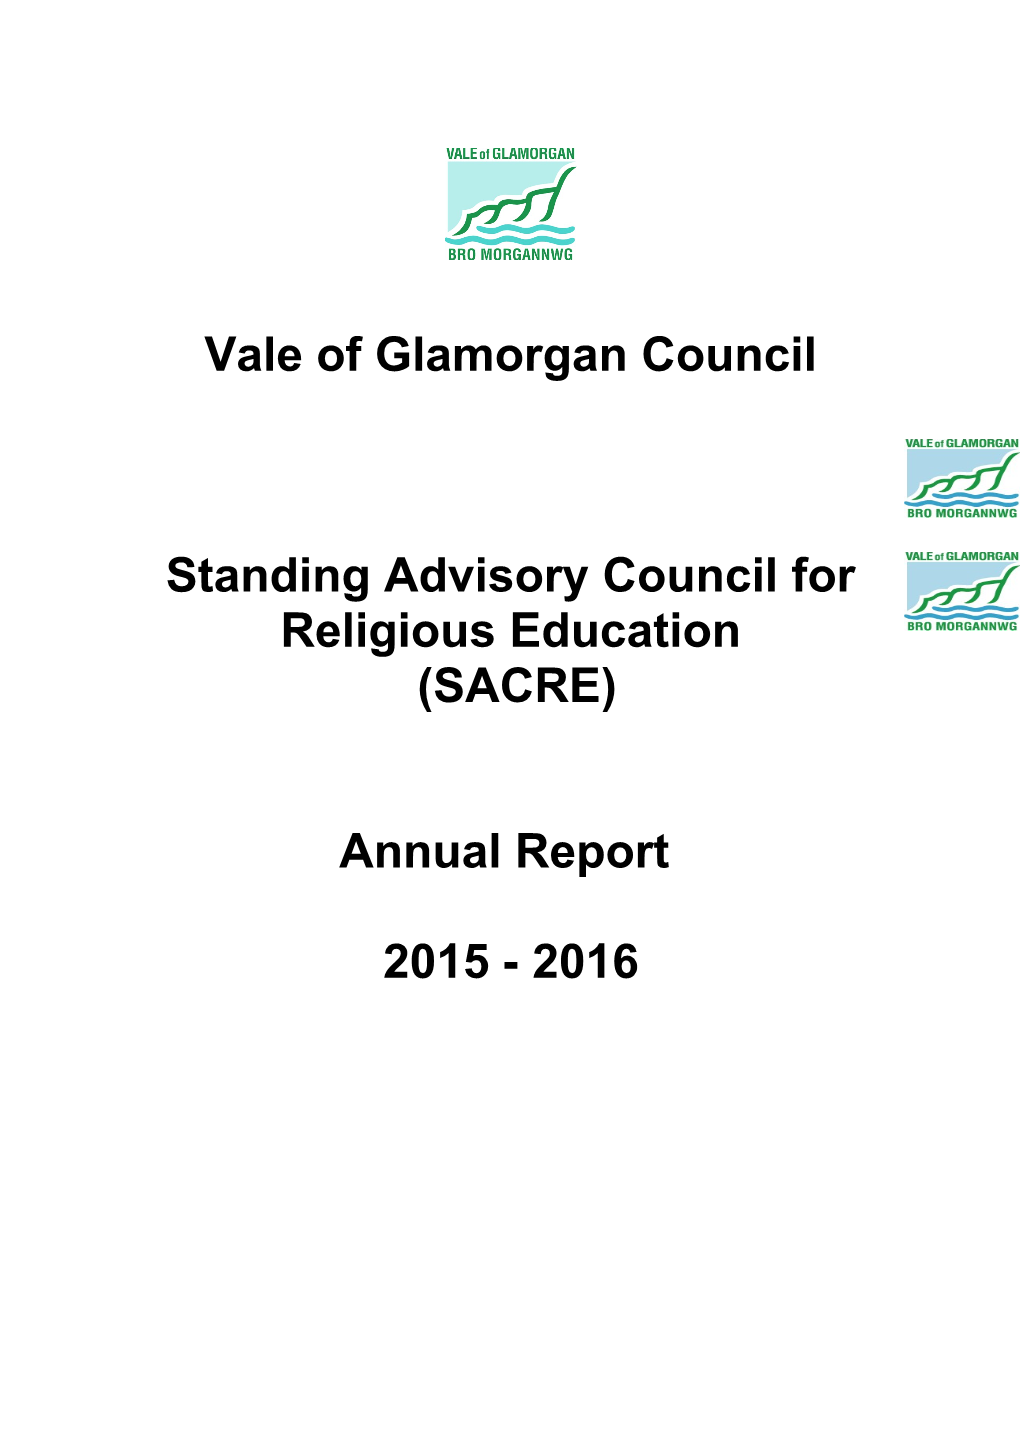 Vale of Glamorgan 2015-2016 SACRE Annual Report (Eng)